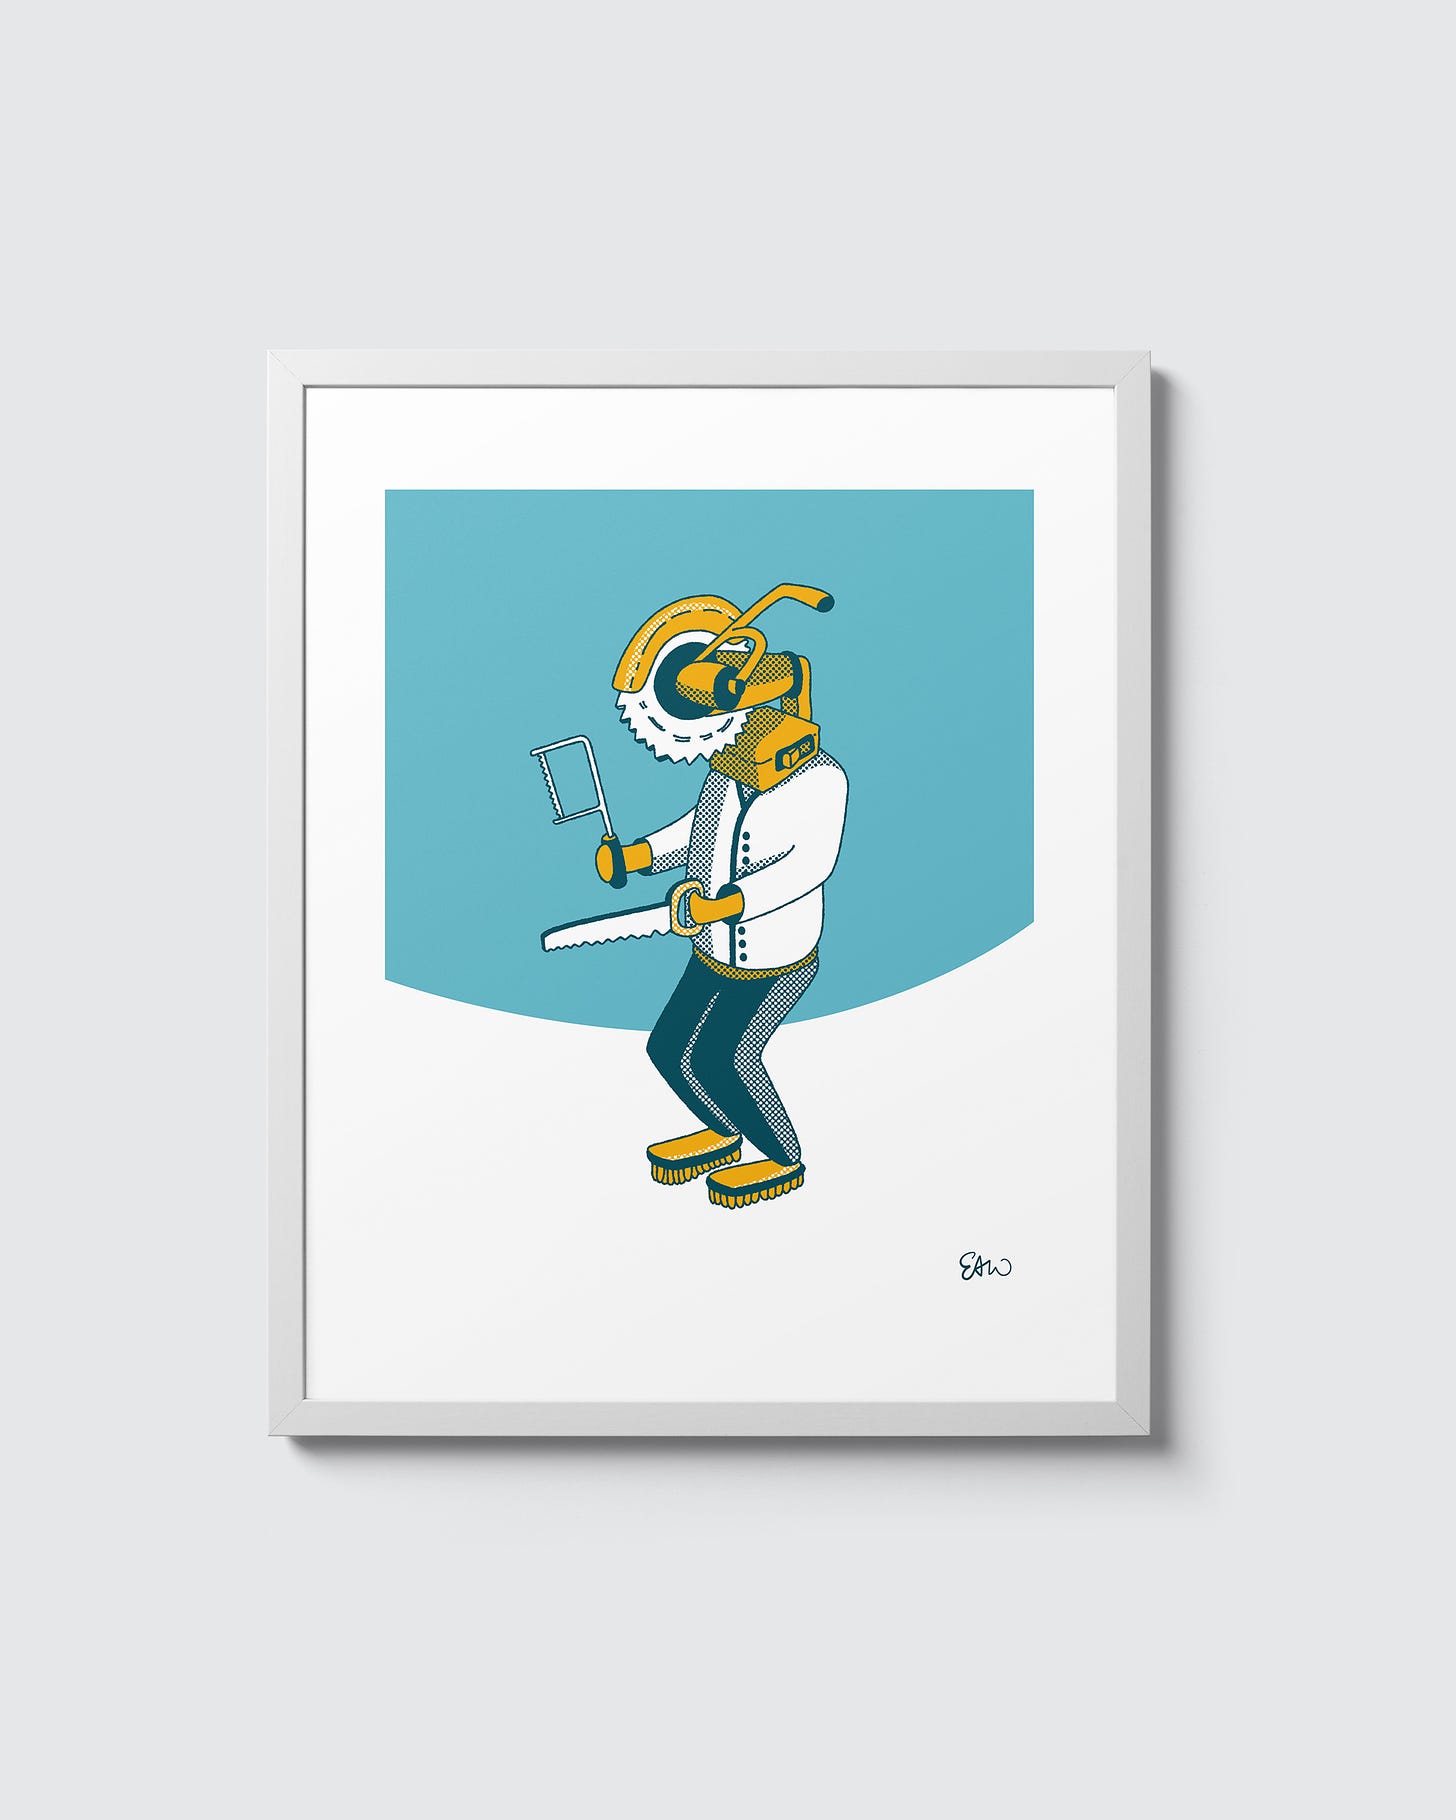 Vector illustration of a human figure with a circular saw instead of a head. The character is also holding a traditional hand in one hand and a hack saw in the other. The drawing respects a limited palette of yellow and teal colours with halftones for shading. 